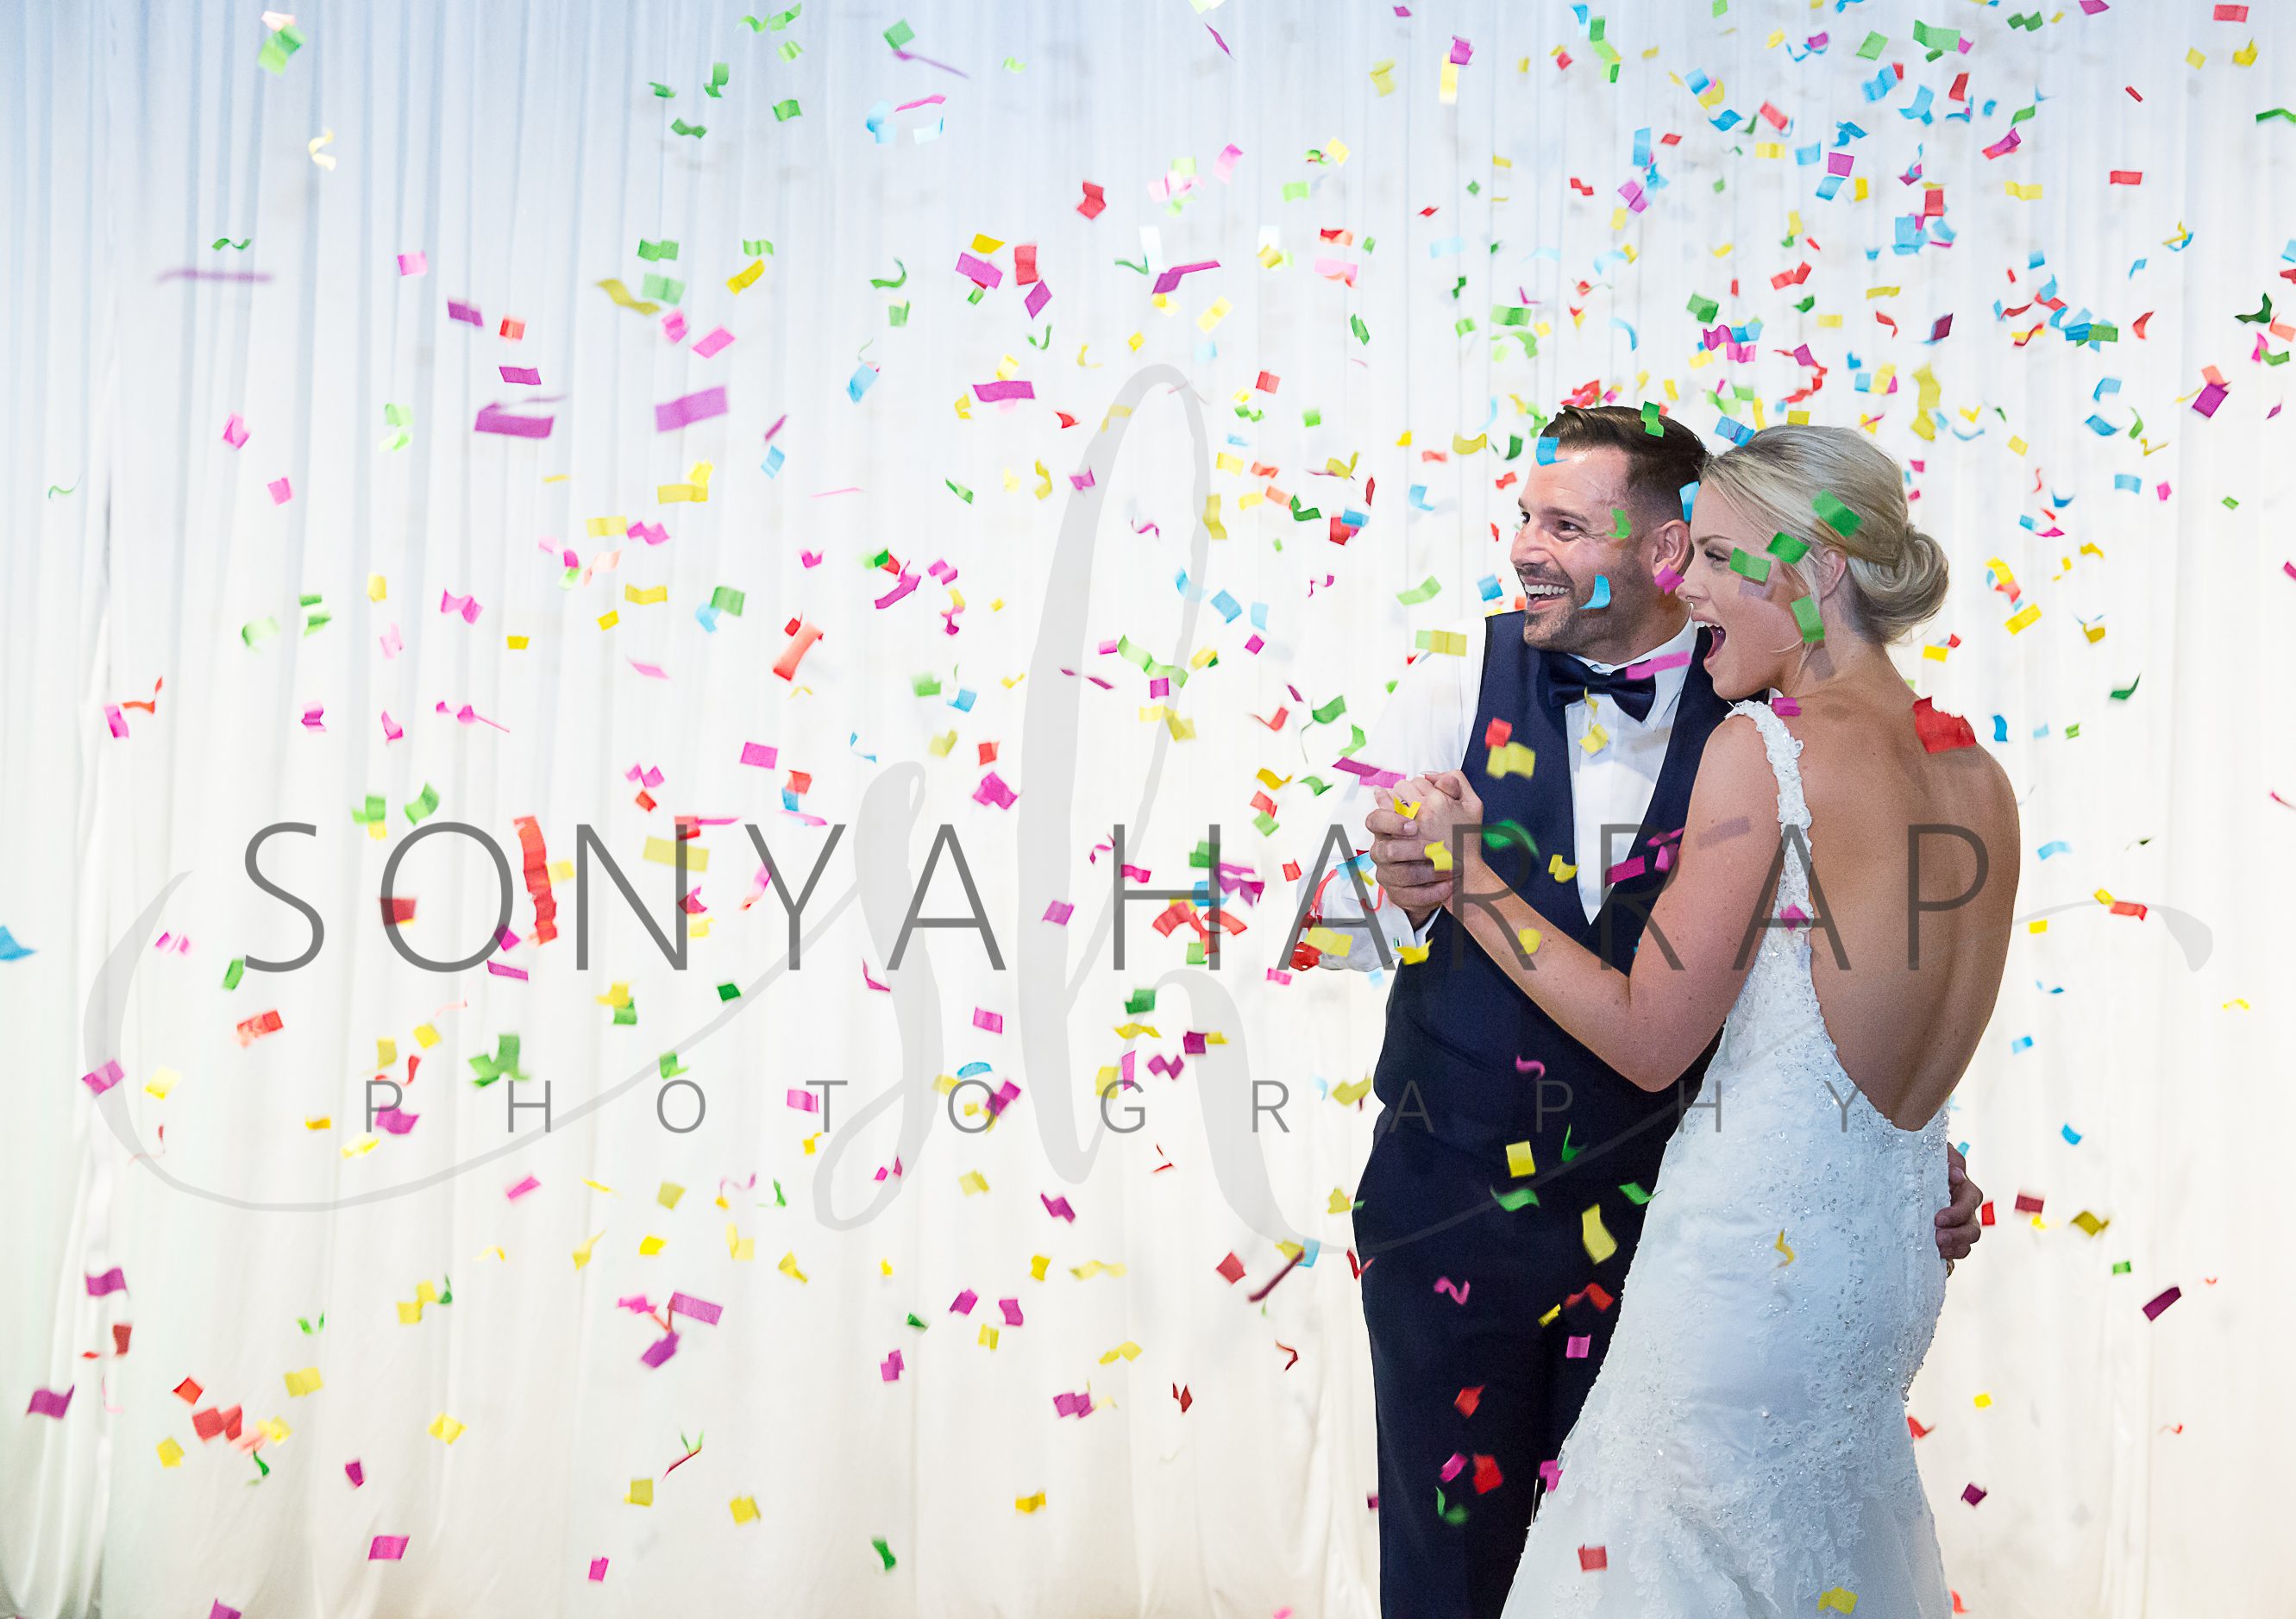 Bride and groom in confetti wedding Photography with white backdrop photography by Sonia Harrap